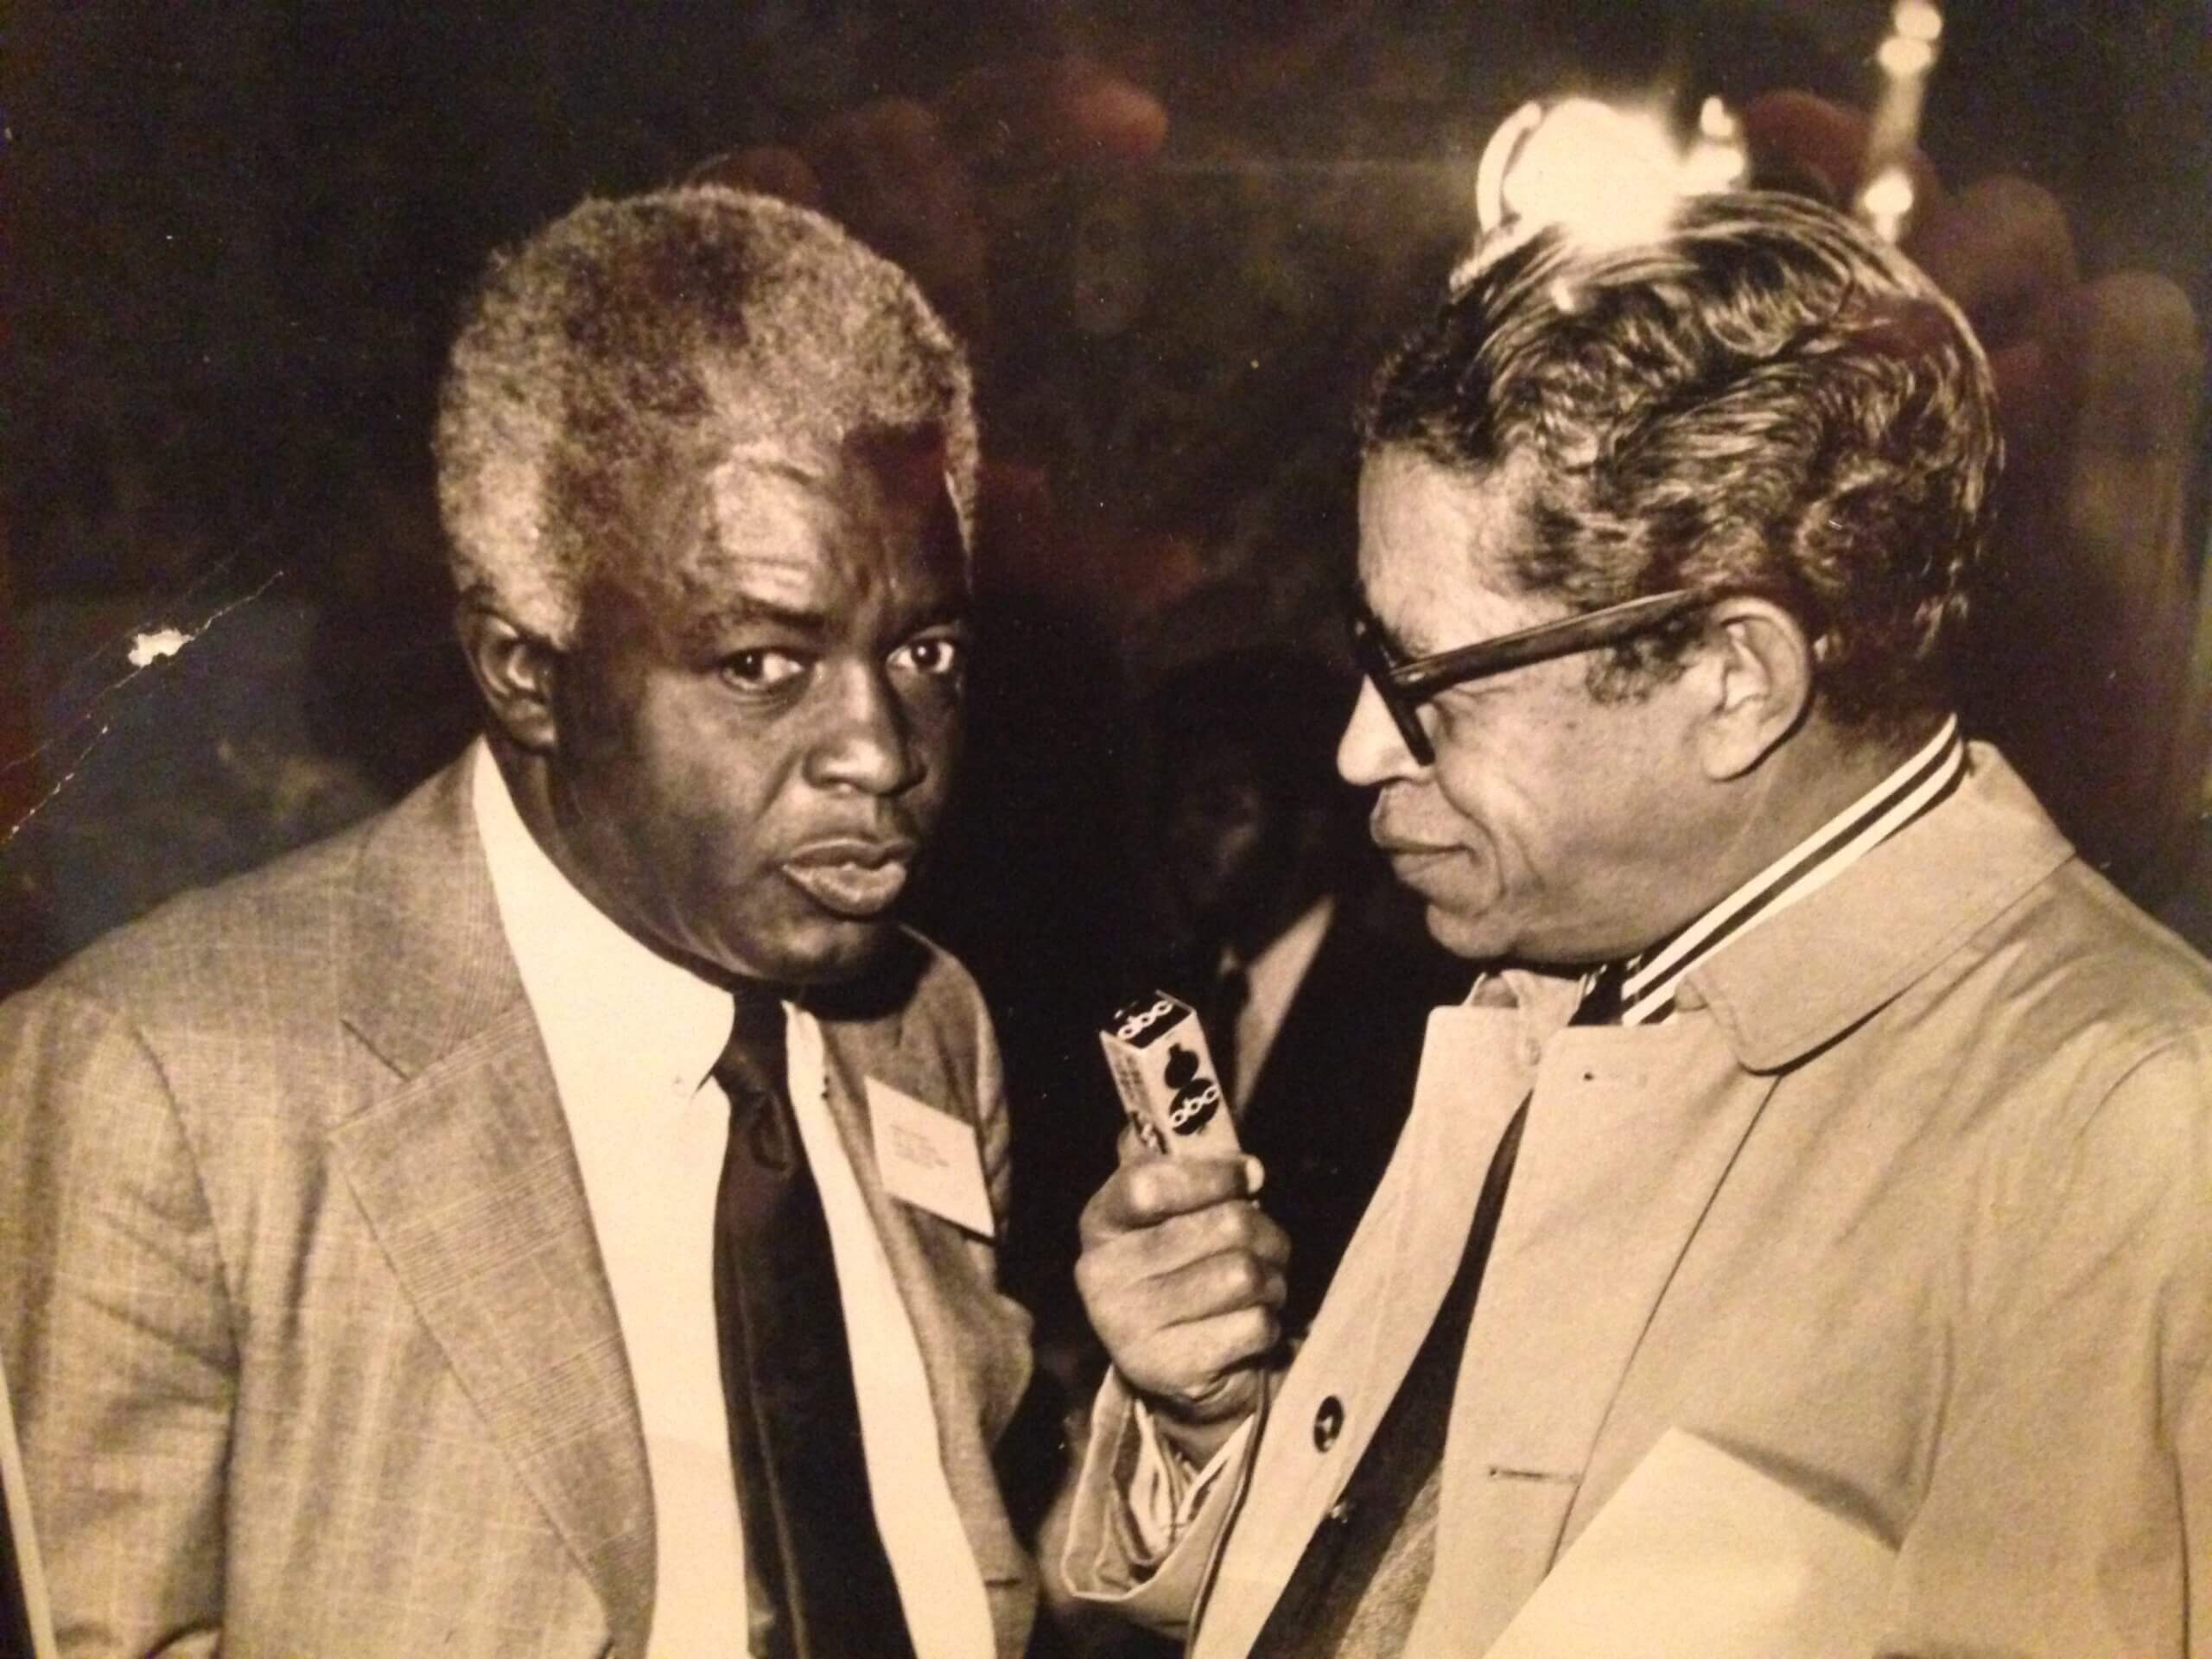 Randy's grandfather Mal Goode interviewing baseball Hall of Famer and civil rights icon Jackie Robinson for ABC